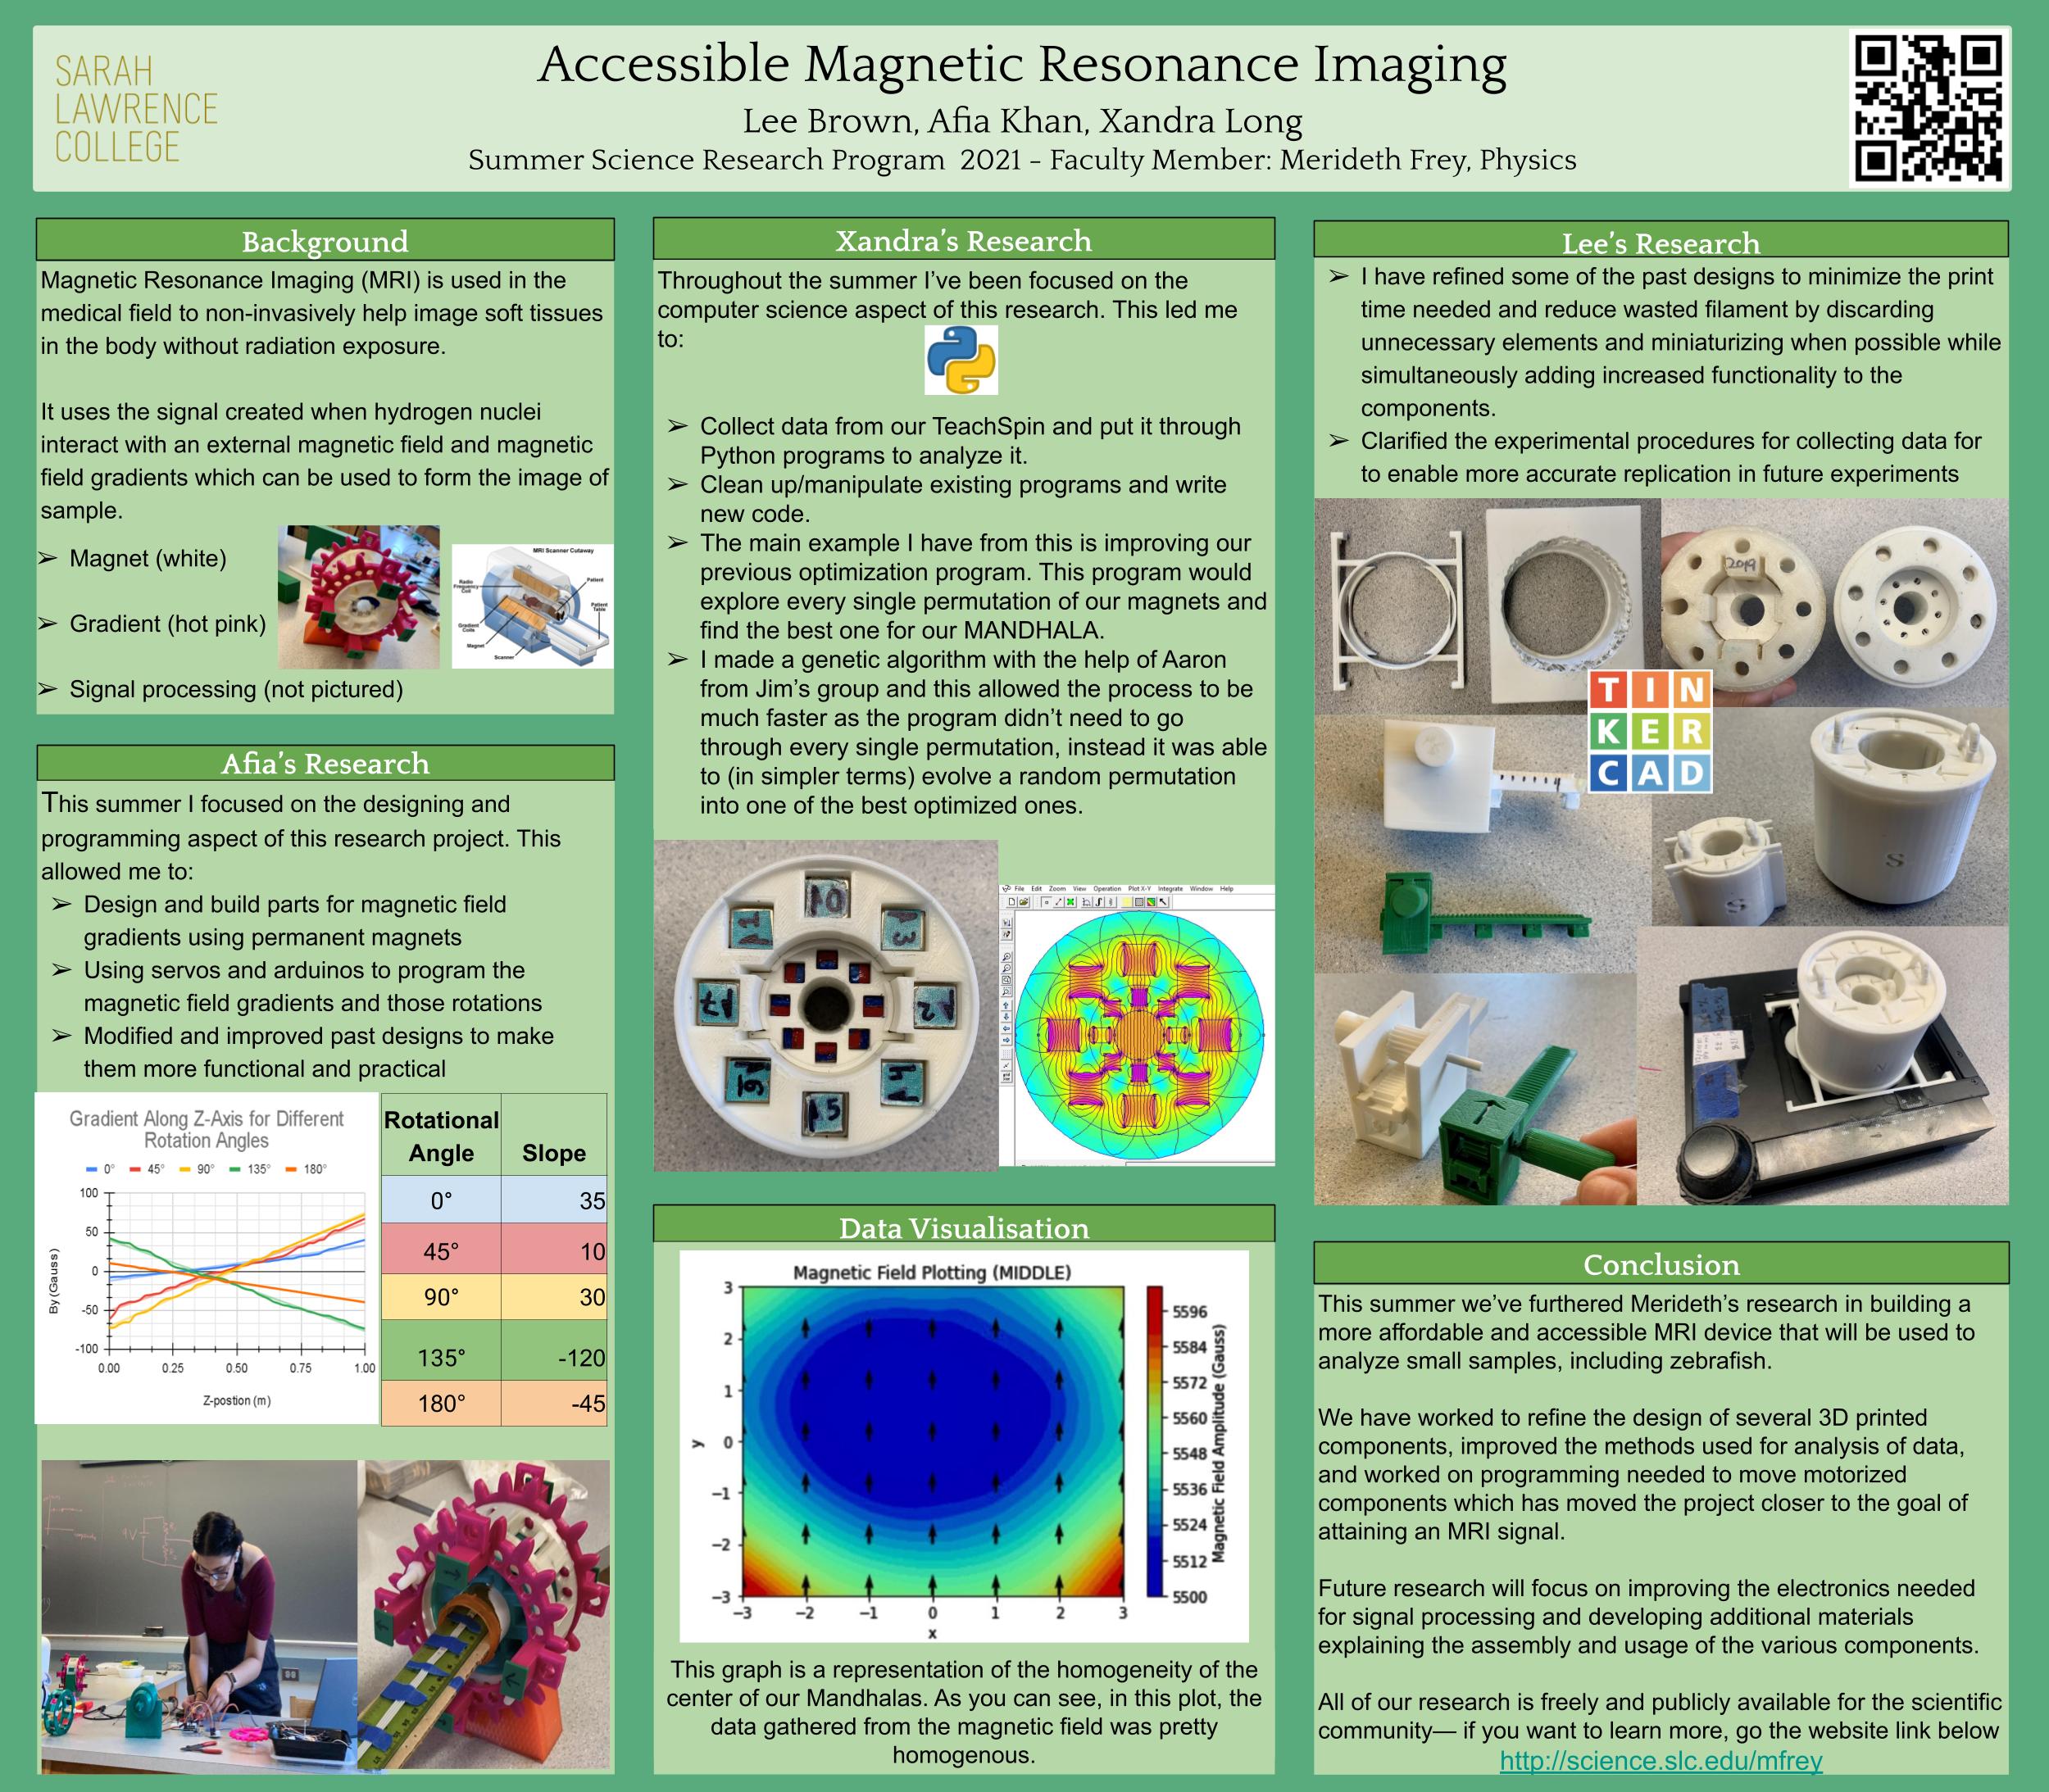 Summer Science 2021 Student Poster